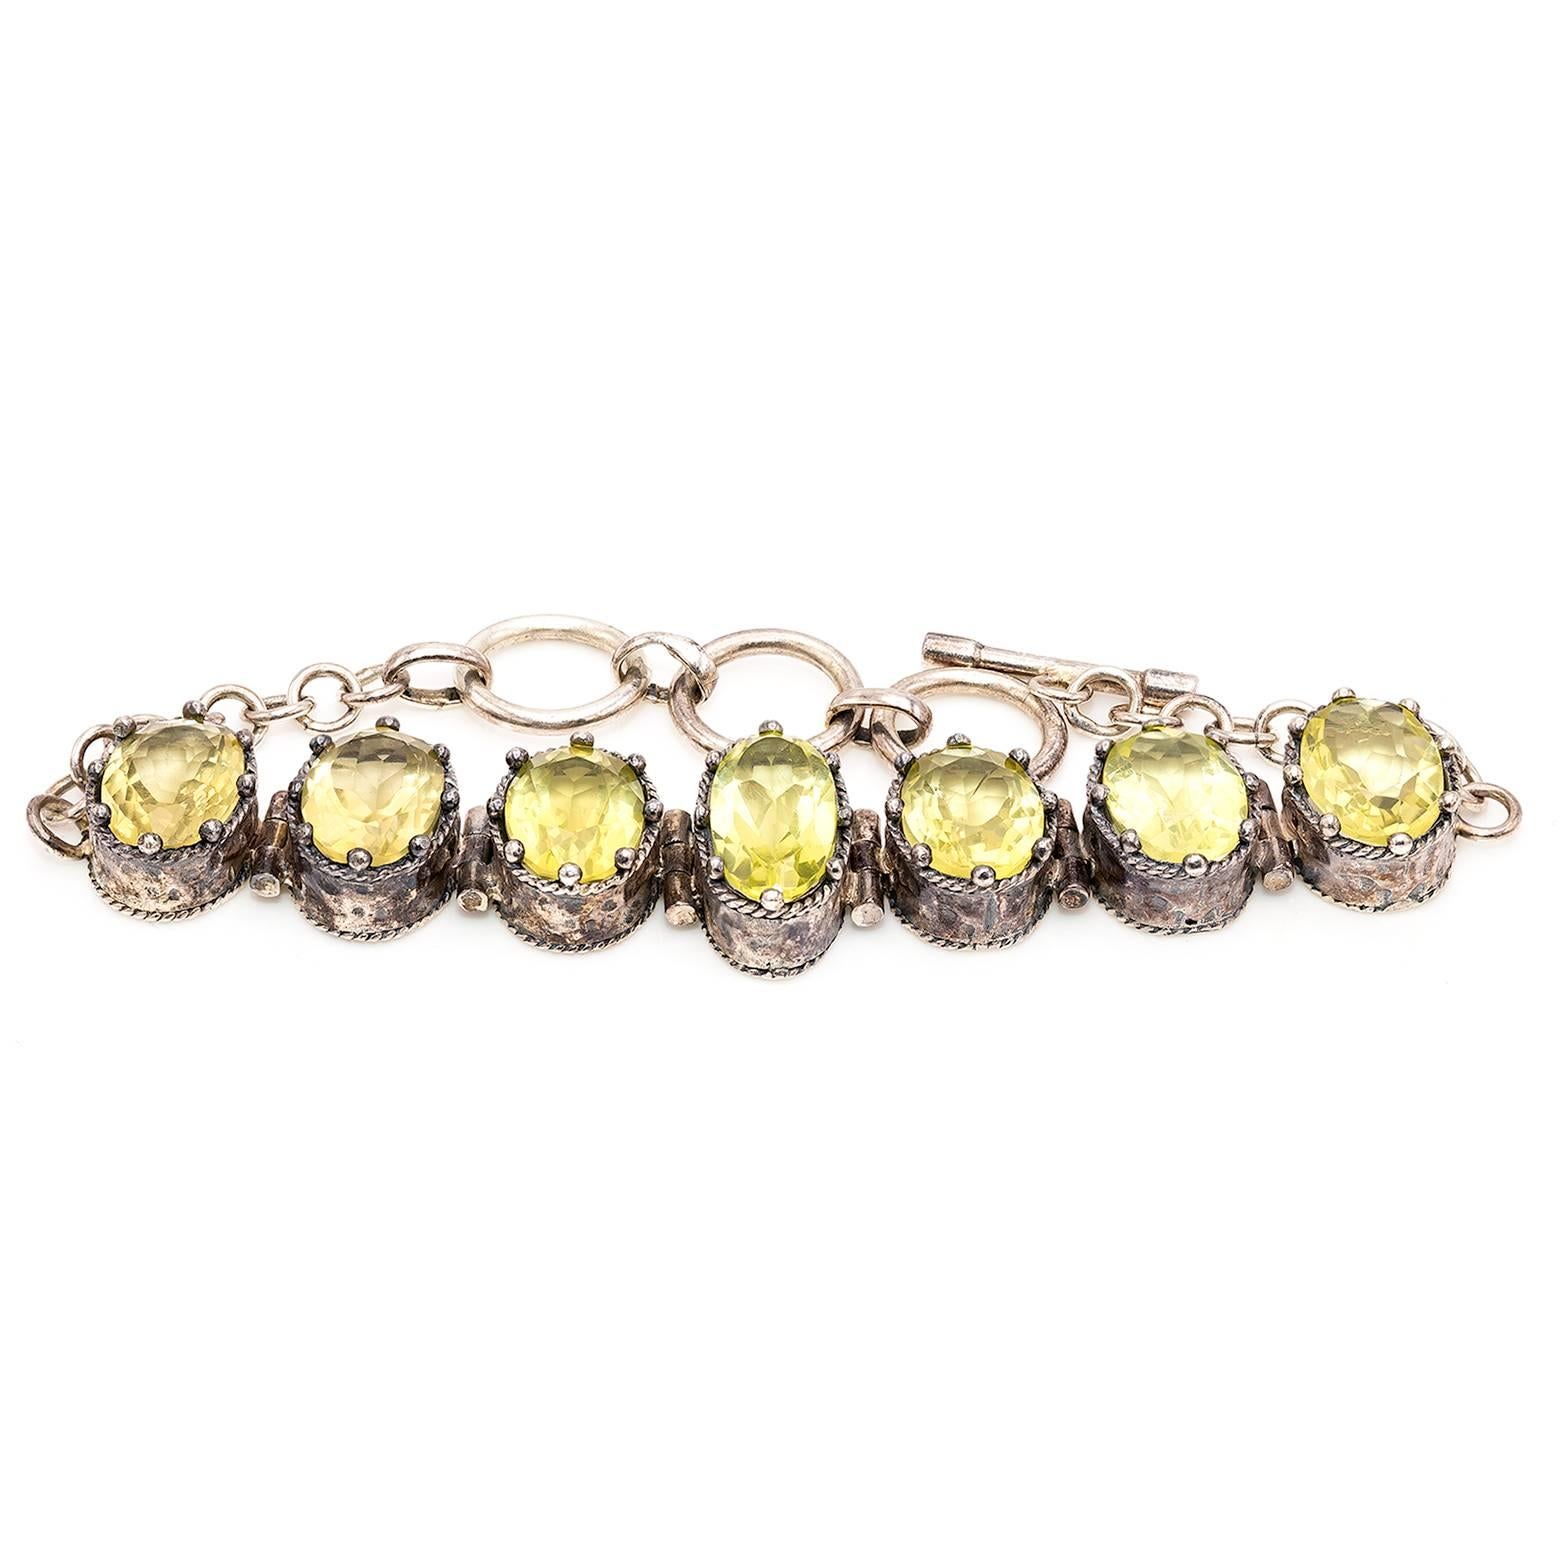 Five large gorgeous rose cut citrine pieces set in sterling silver create a substantial intricate bracelet. The bezel looks regal like a crown and the setting is hammered creating an intricate piece of art that is detail oriented. The size is